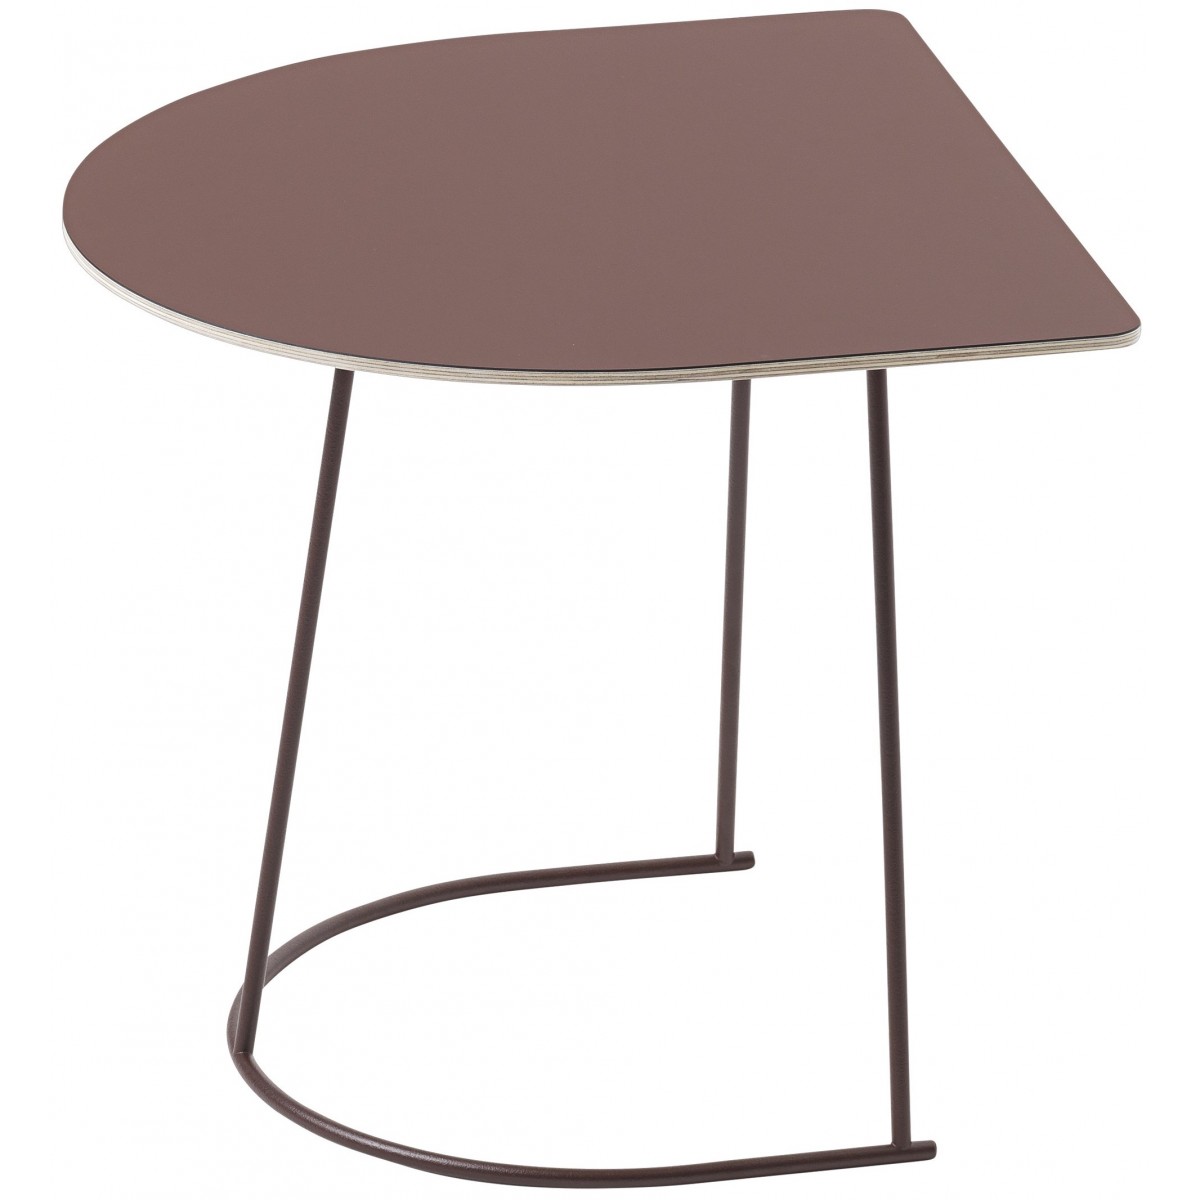 half size - plum - Airy table